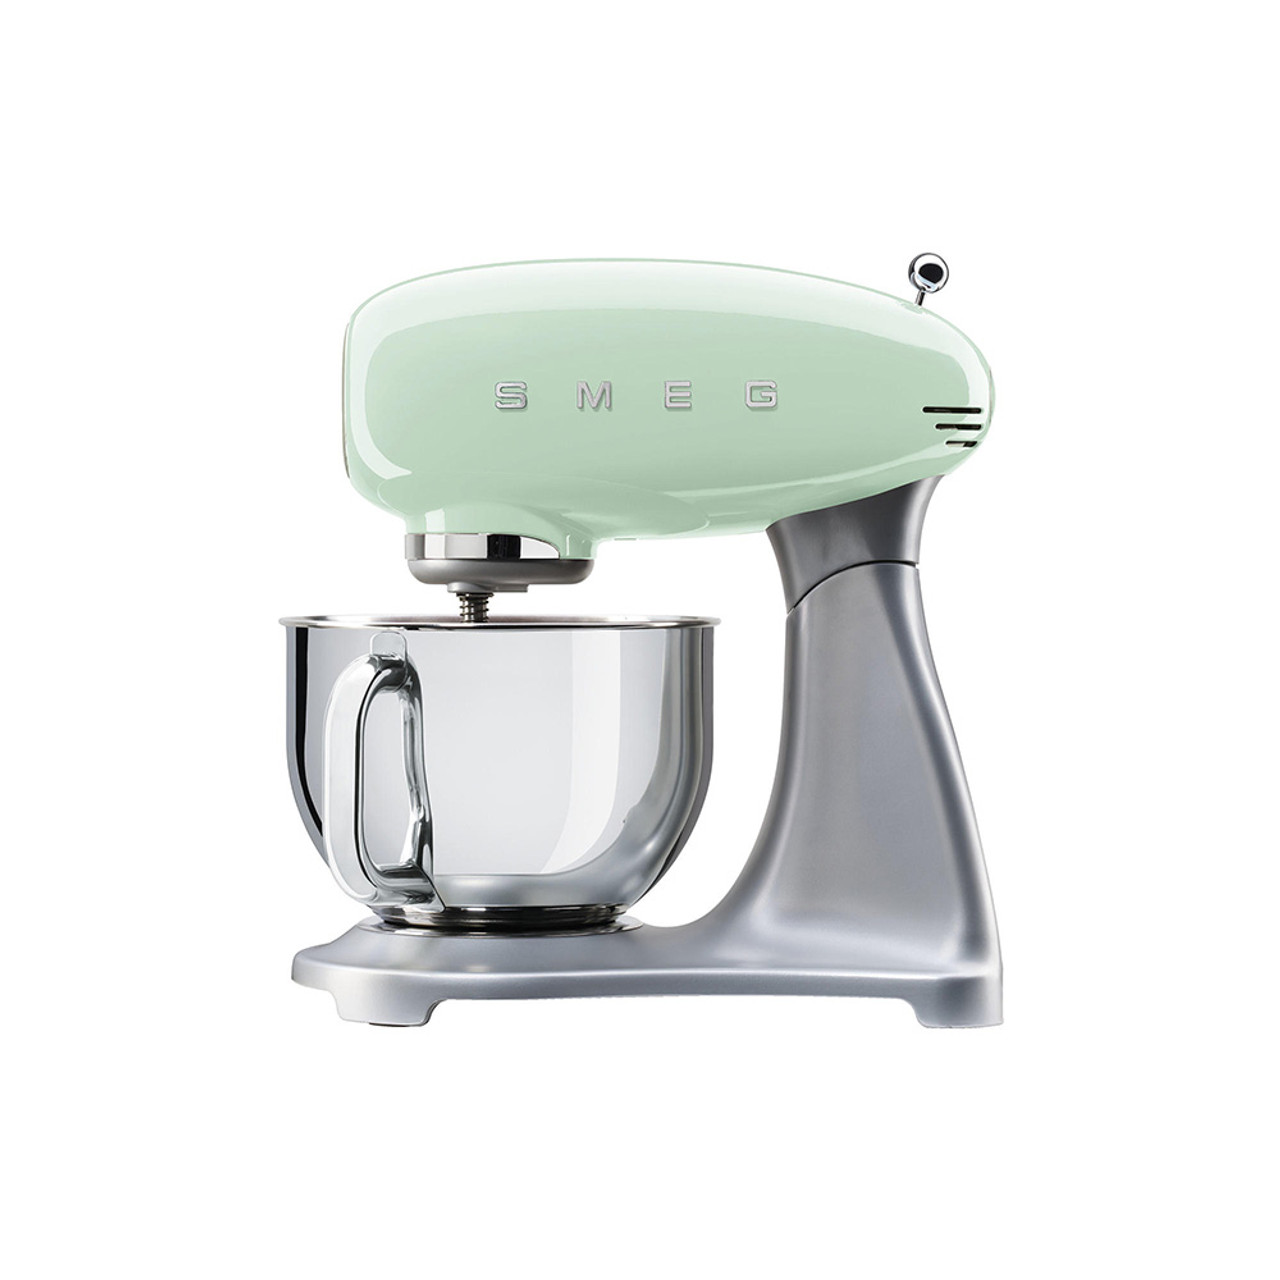 https://cdn11.bigcommerce.com/s-hccytny0od/images/stencil/1280x1280/products/1217/3705/smeg-stand-mixer-pastel-green__55868.1588650038.jpg?c=2?imbypass=on